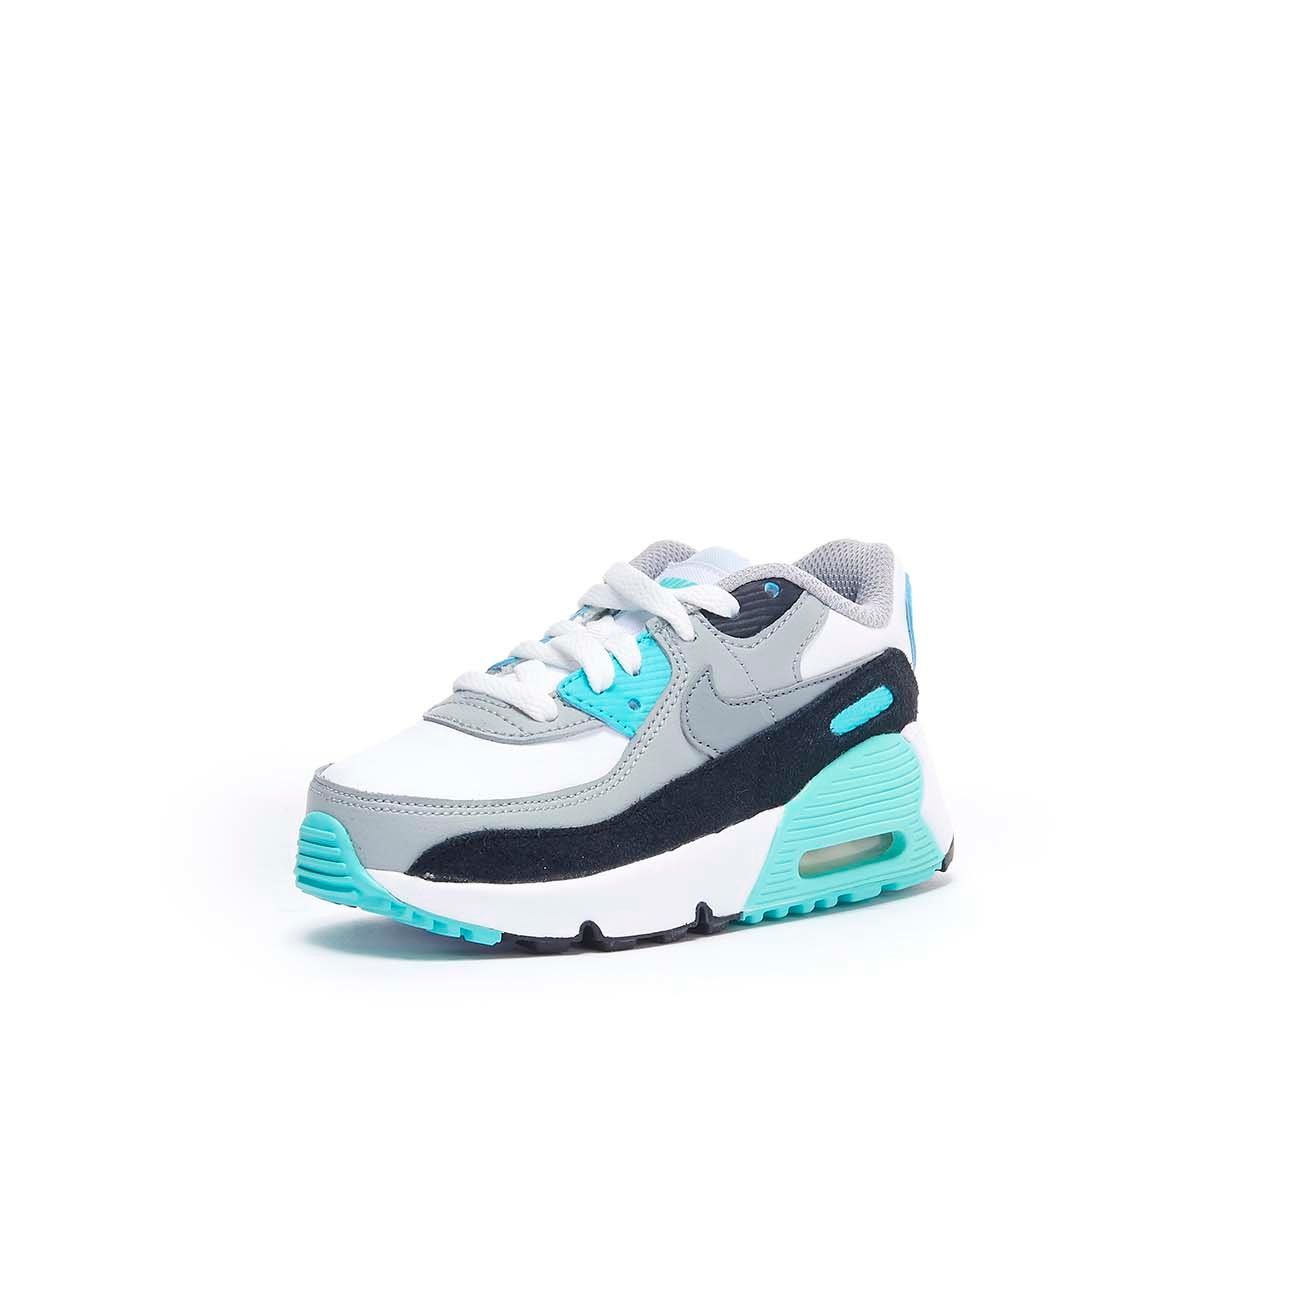 air max 90 hyper turquoise